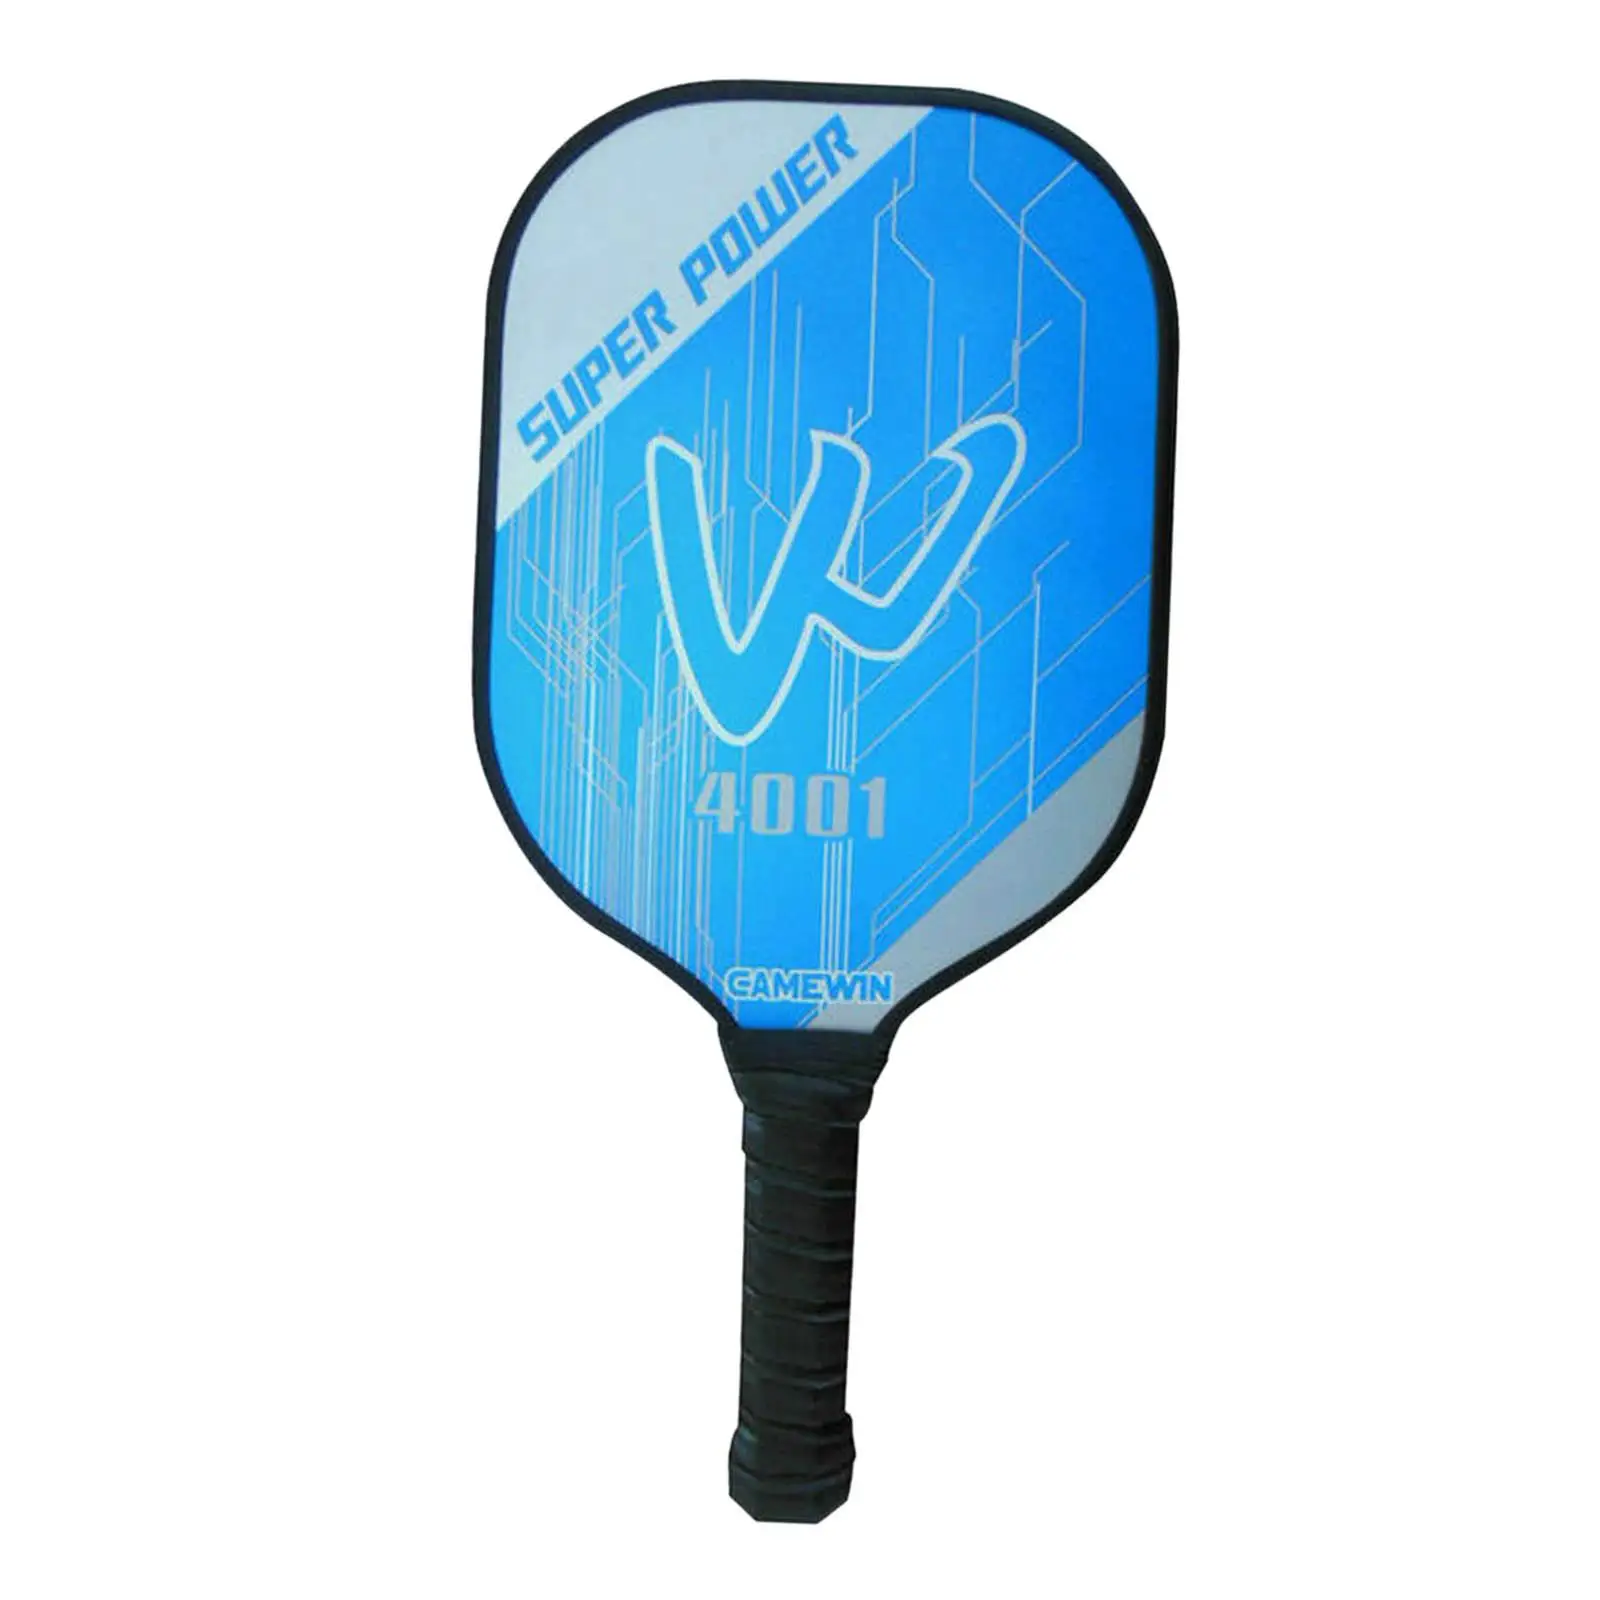 Paddle Professional Protable Lightweight Carbon Fiber Surface  Racket  Paddles 1PC  Paddle for Outdoor